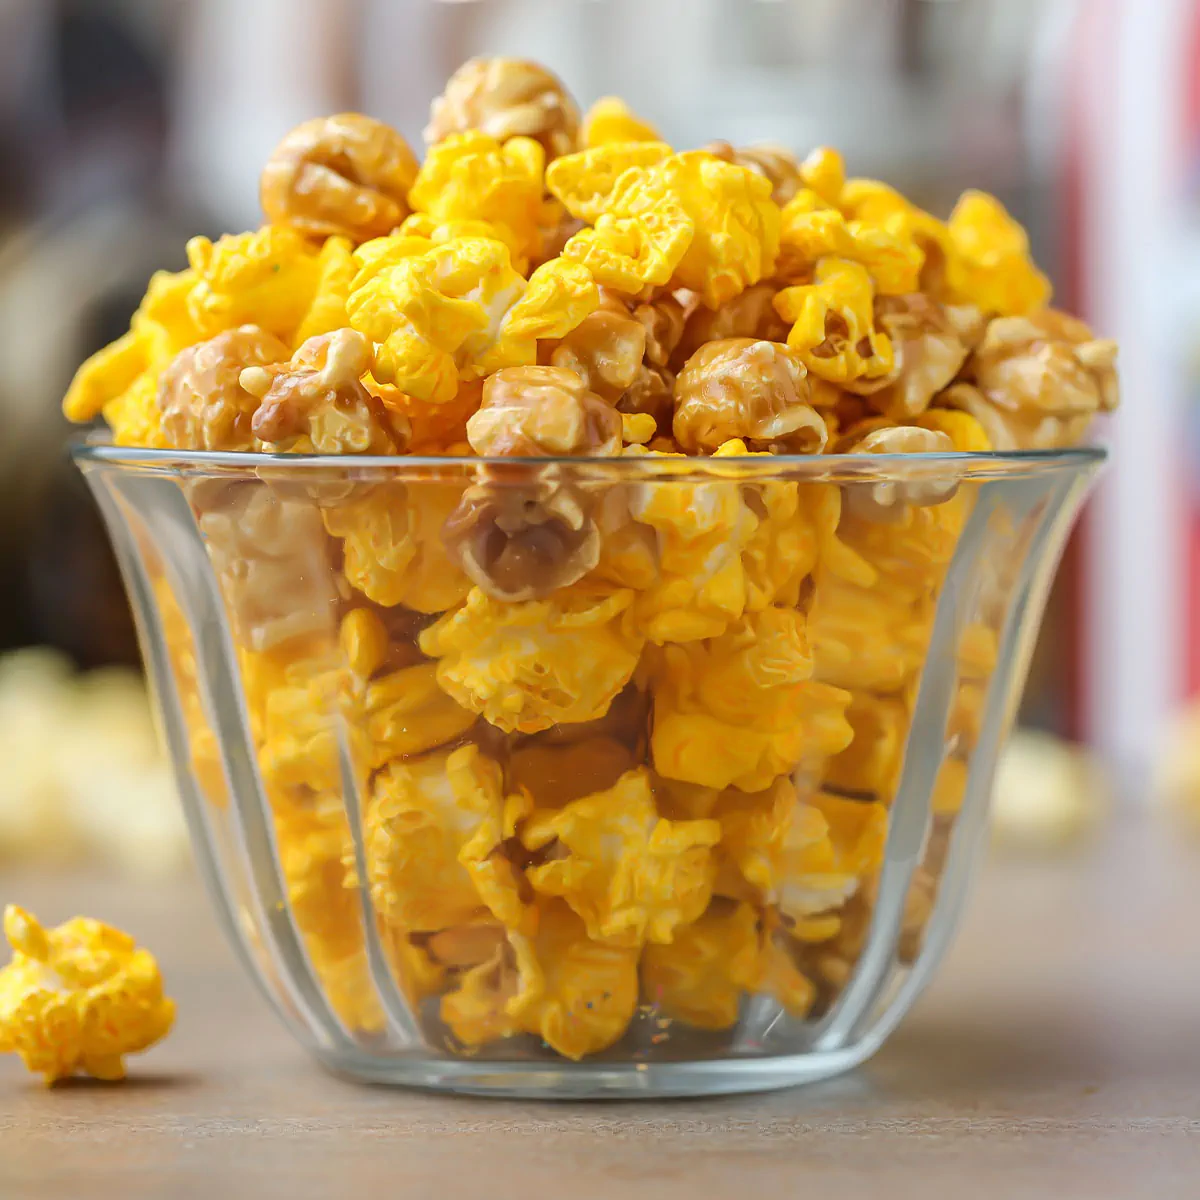 Chicago-style popcorn - Caramel and Cheddar Gourmet Popcorn